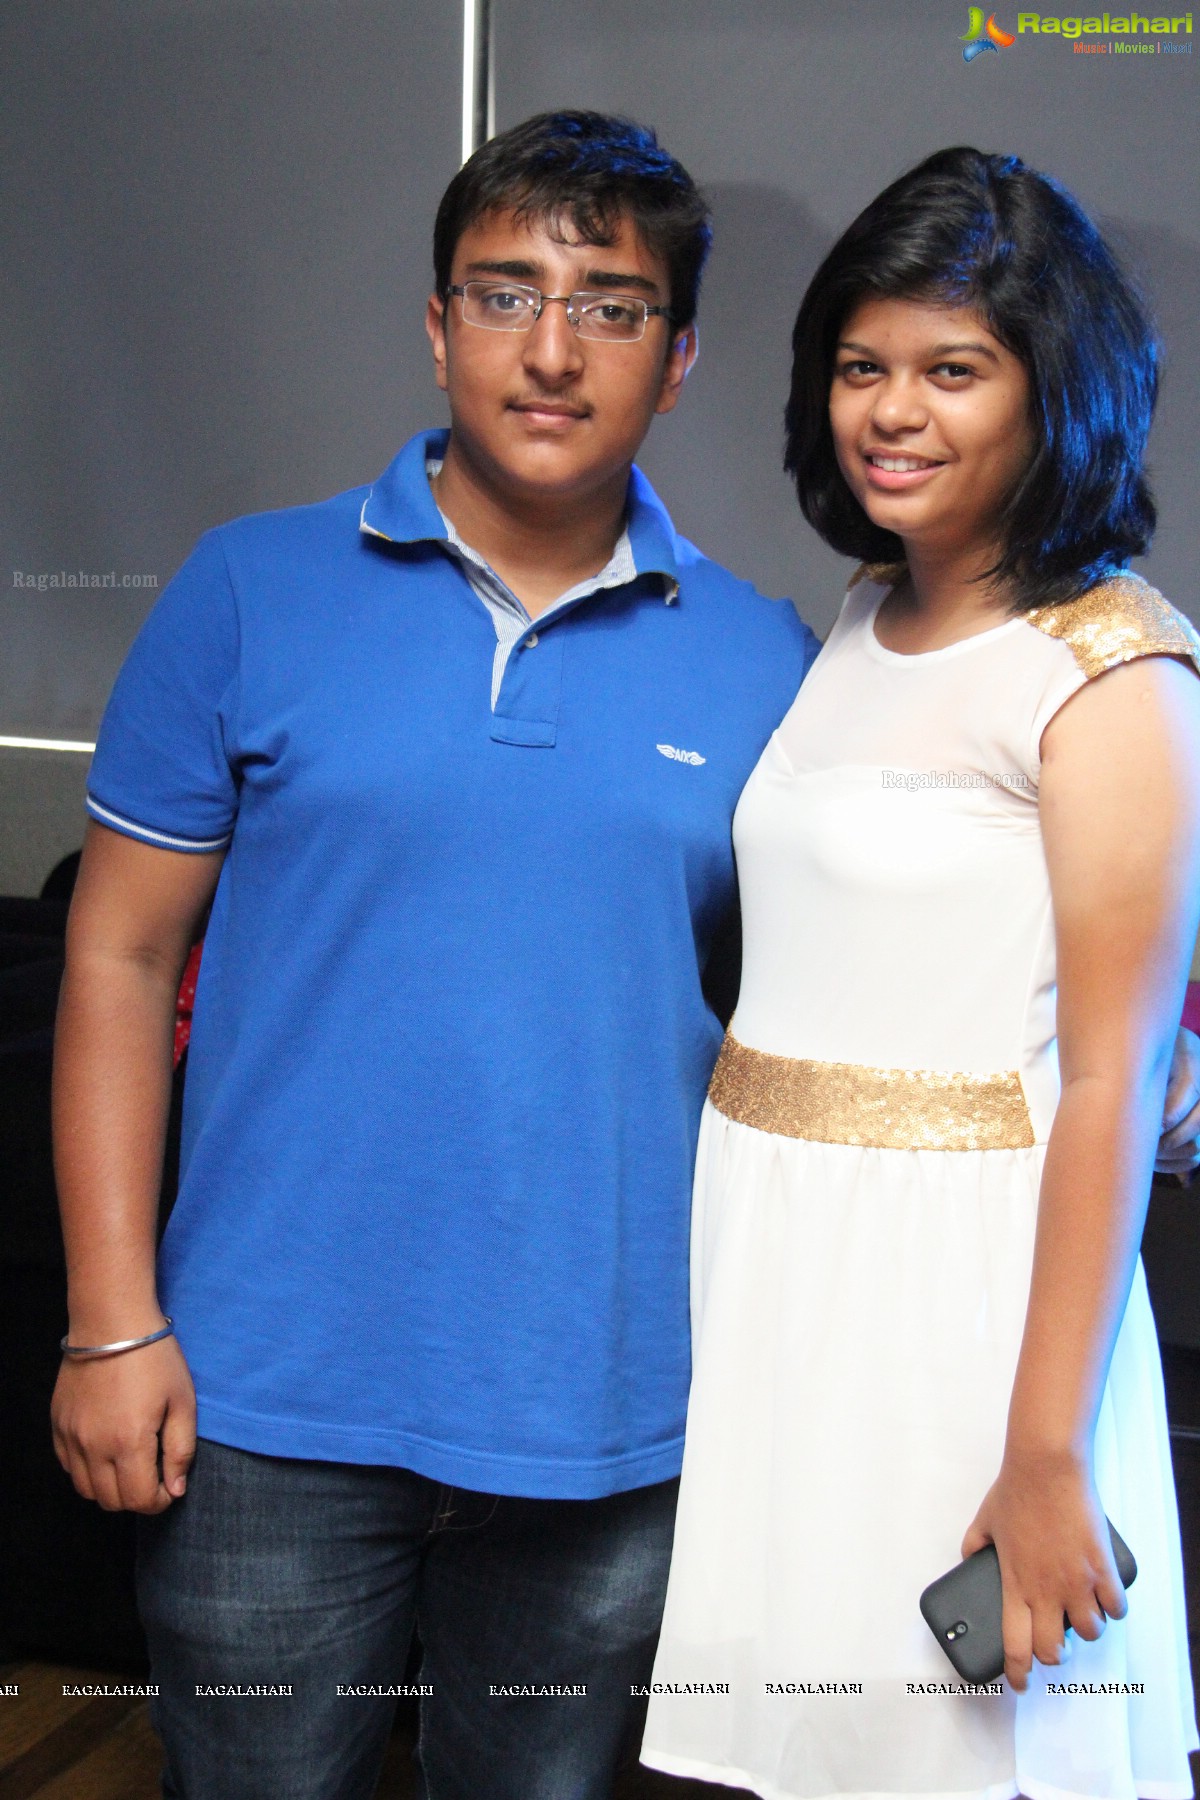 Mallveka Birthday Party 2014 at The Vue Lounge, Hyderabad